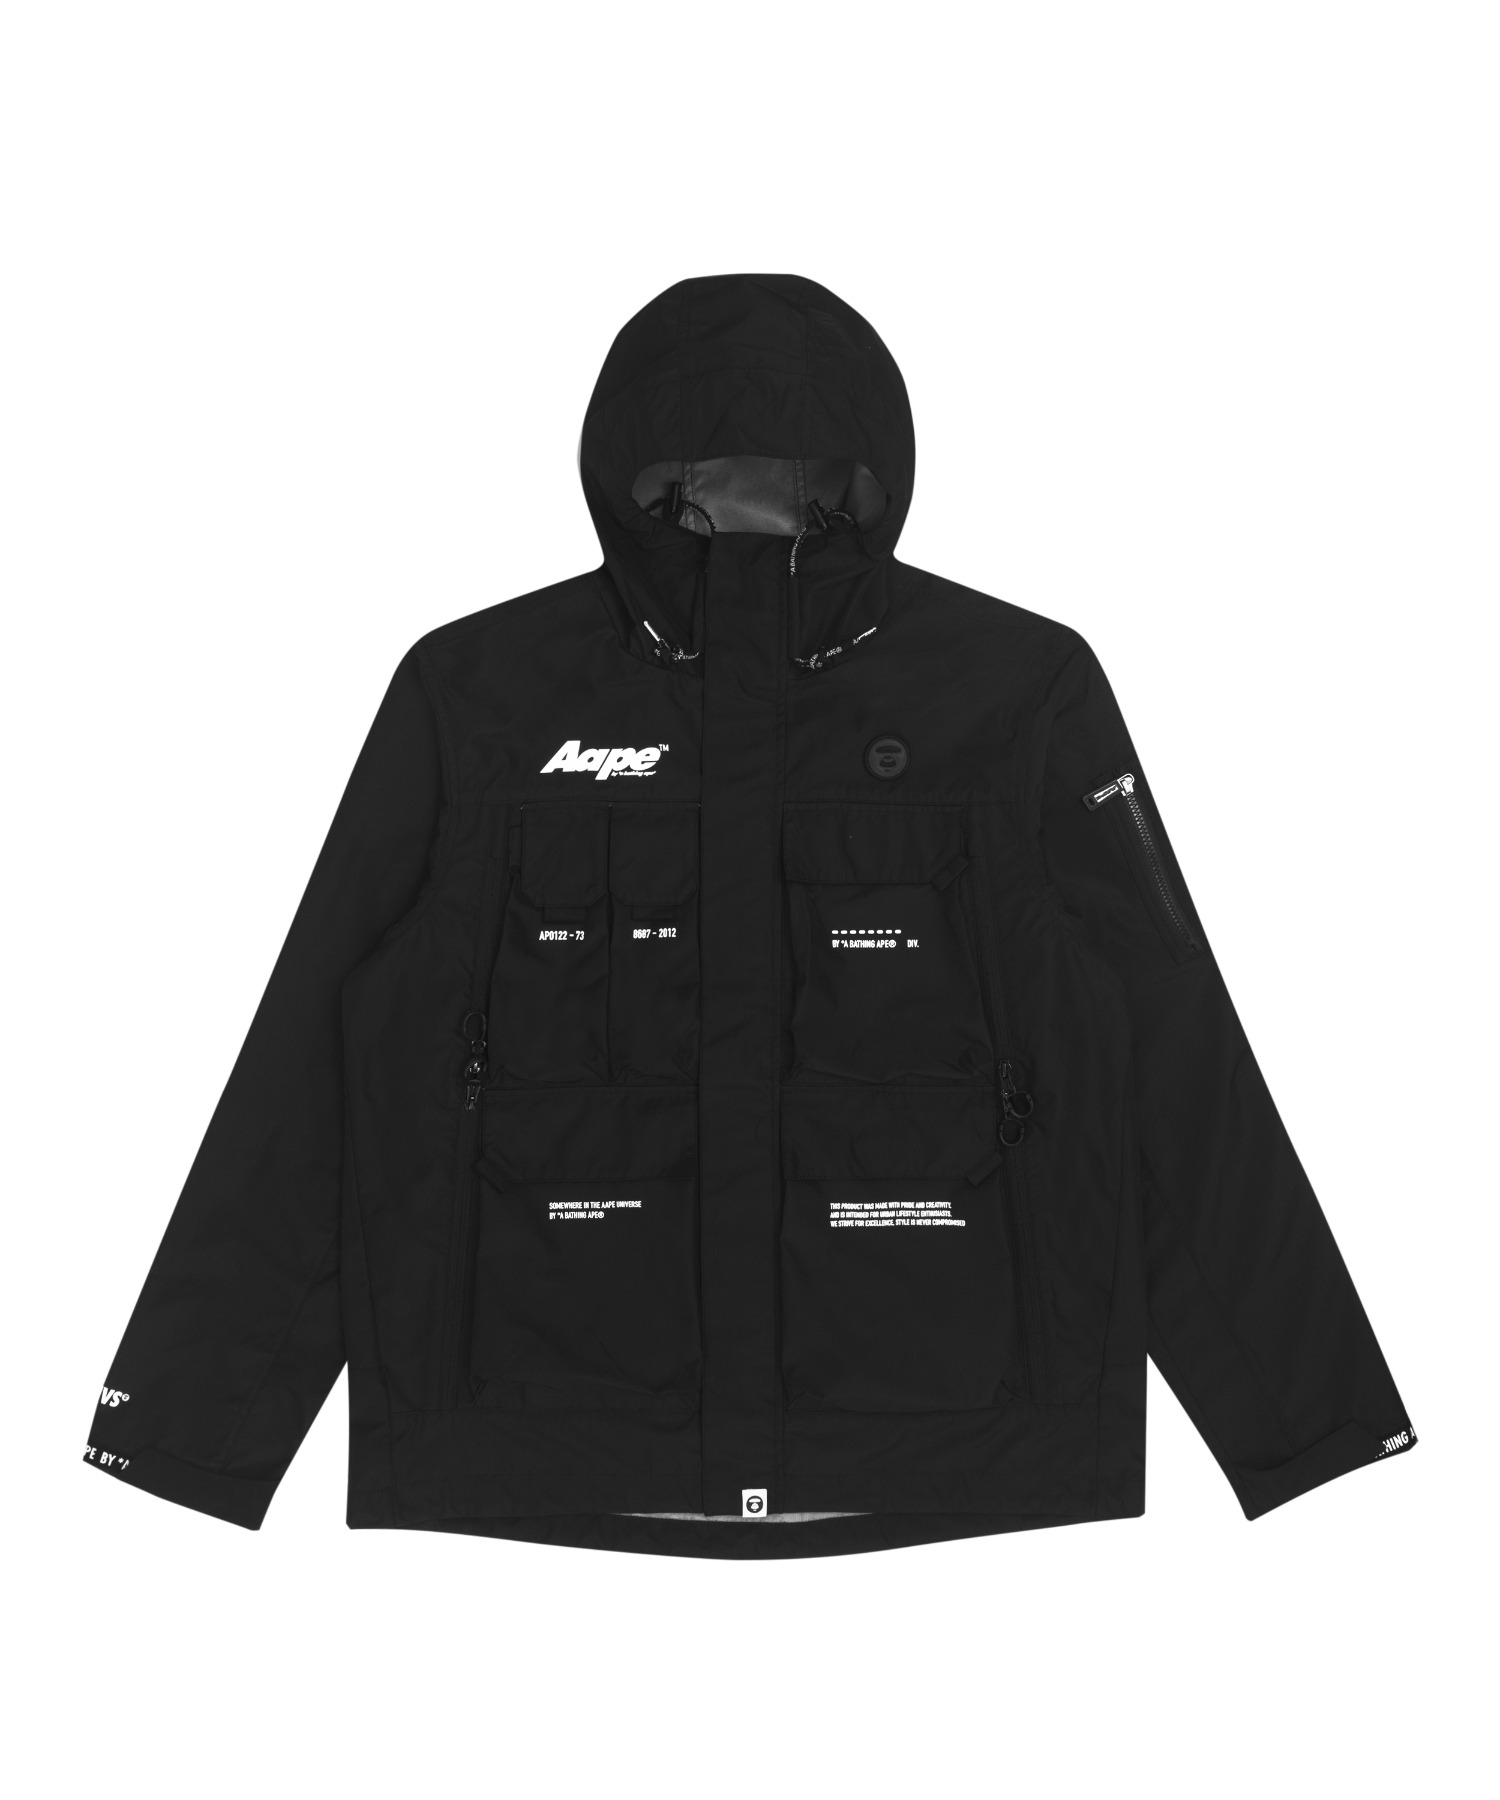 AAPE BY A BATHING LIGHT 珍しい 商い APEAAPE JACKET WEIGHT